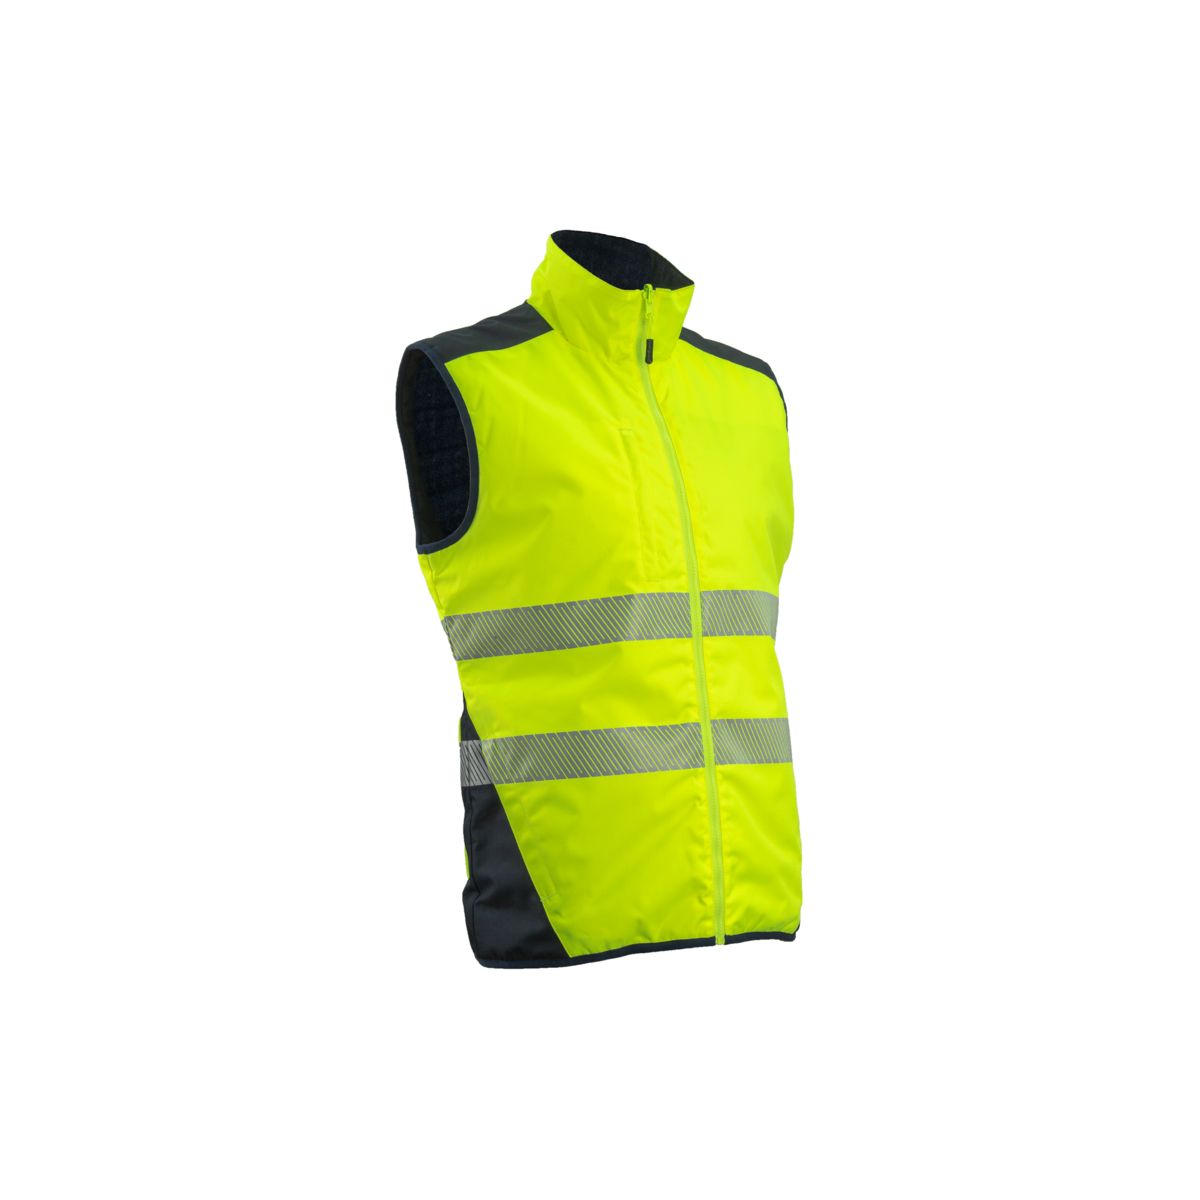 Gilet YORU froid réversible jaune HV/marine, Ripstop 100%PES maille - COVERGUARD - Taille L 0